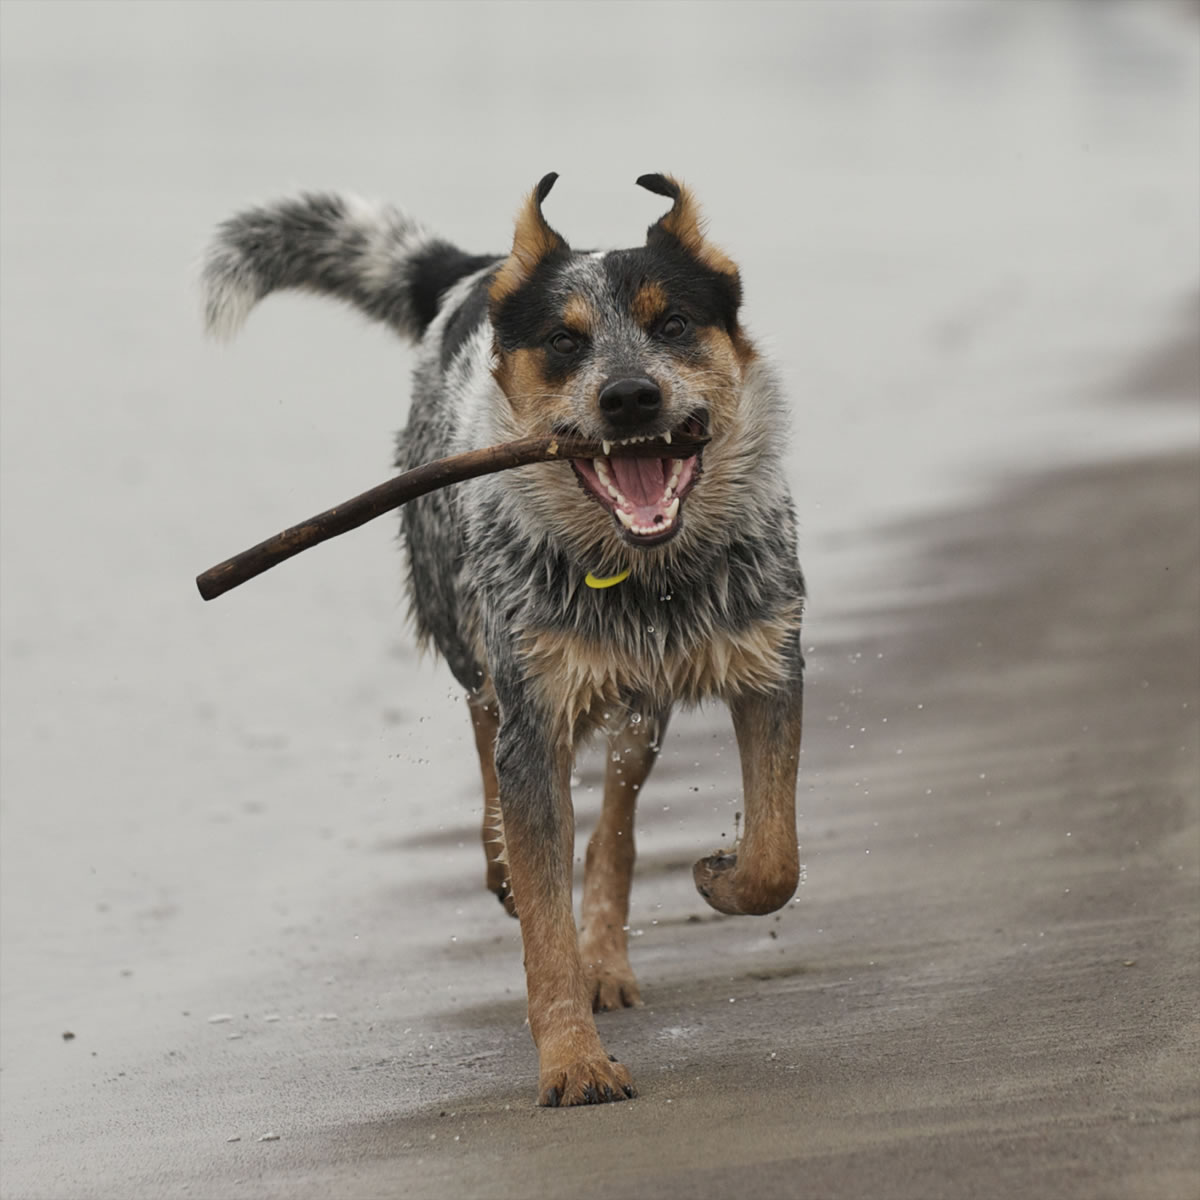 This image of Columbian photographer Steve Lane's dog Cooper, an Australian cattle dog mix, is an example of a photo that could make it on the cover of a homemade calendar. Send your own 2013 calendar's cover photo to stover.harger@columbian.com by Dec.